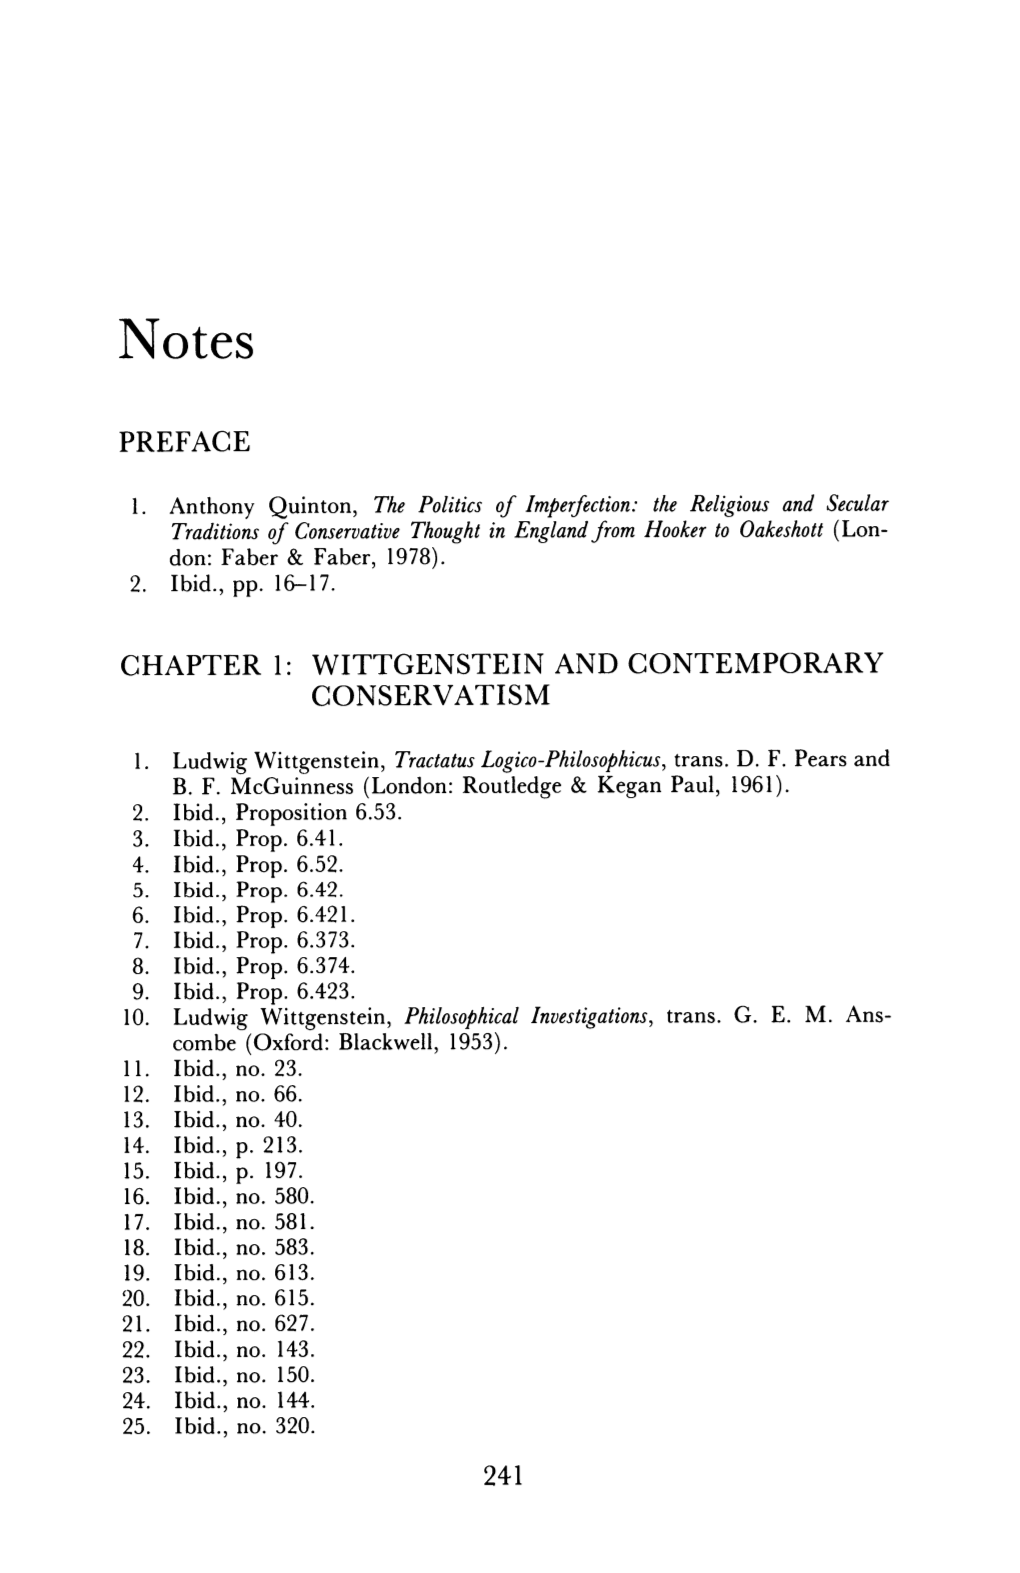 Preface Chapter 1: Wittgenstein and Contemporary Conservatism